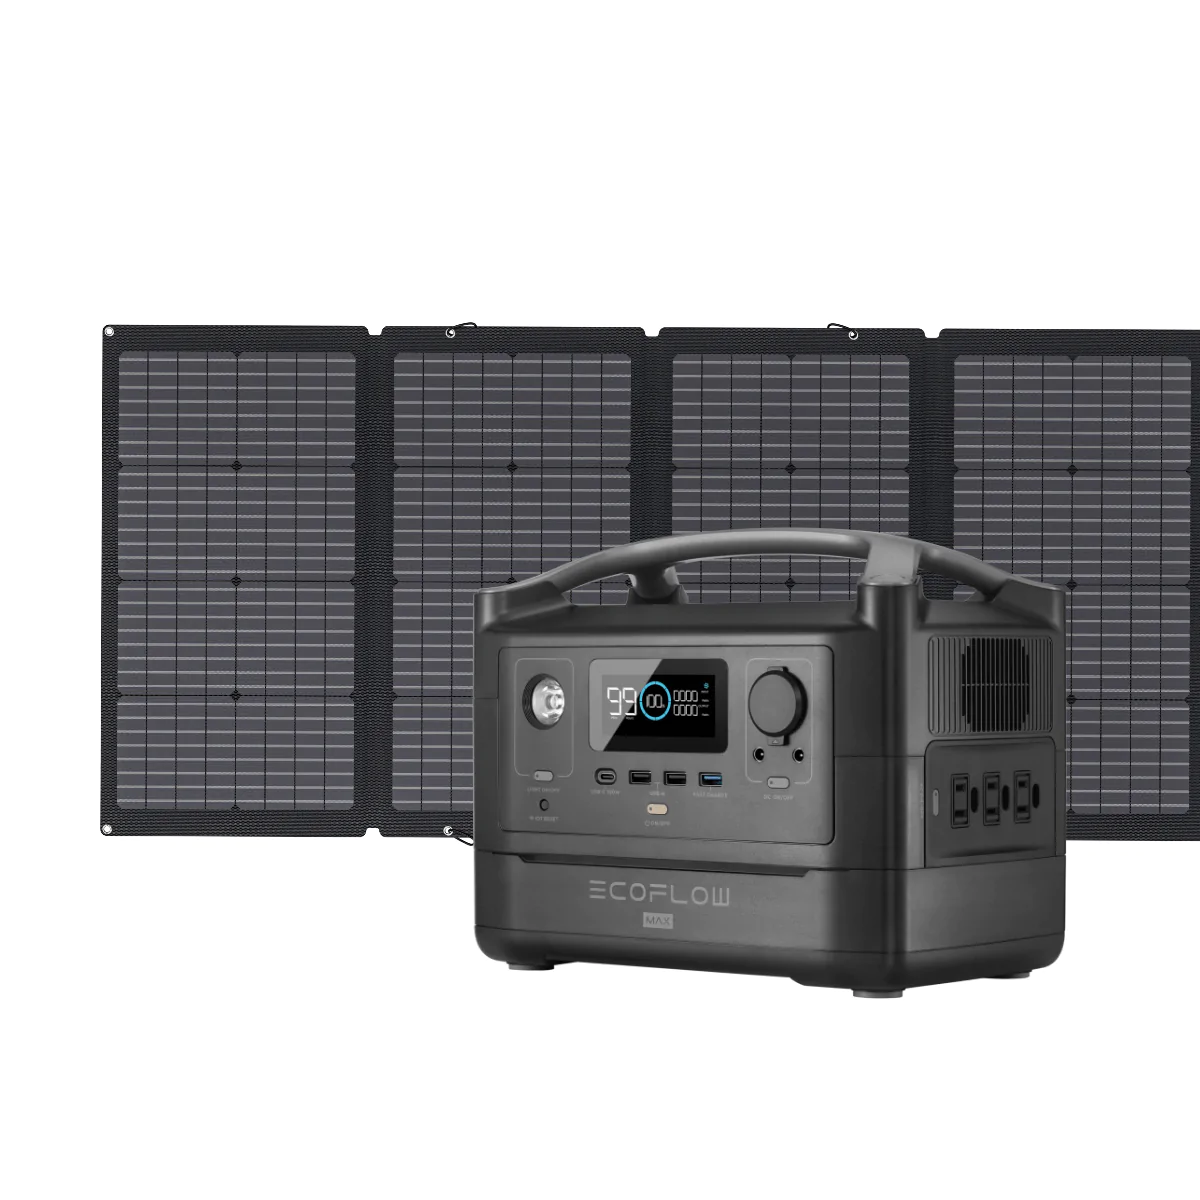 A portable solar power system with remote control and a portable solar panel.